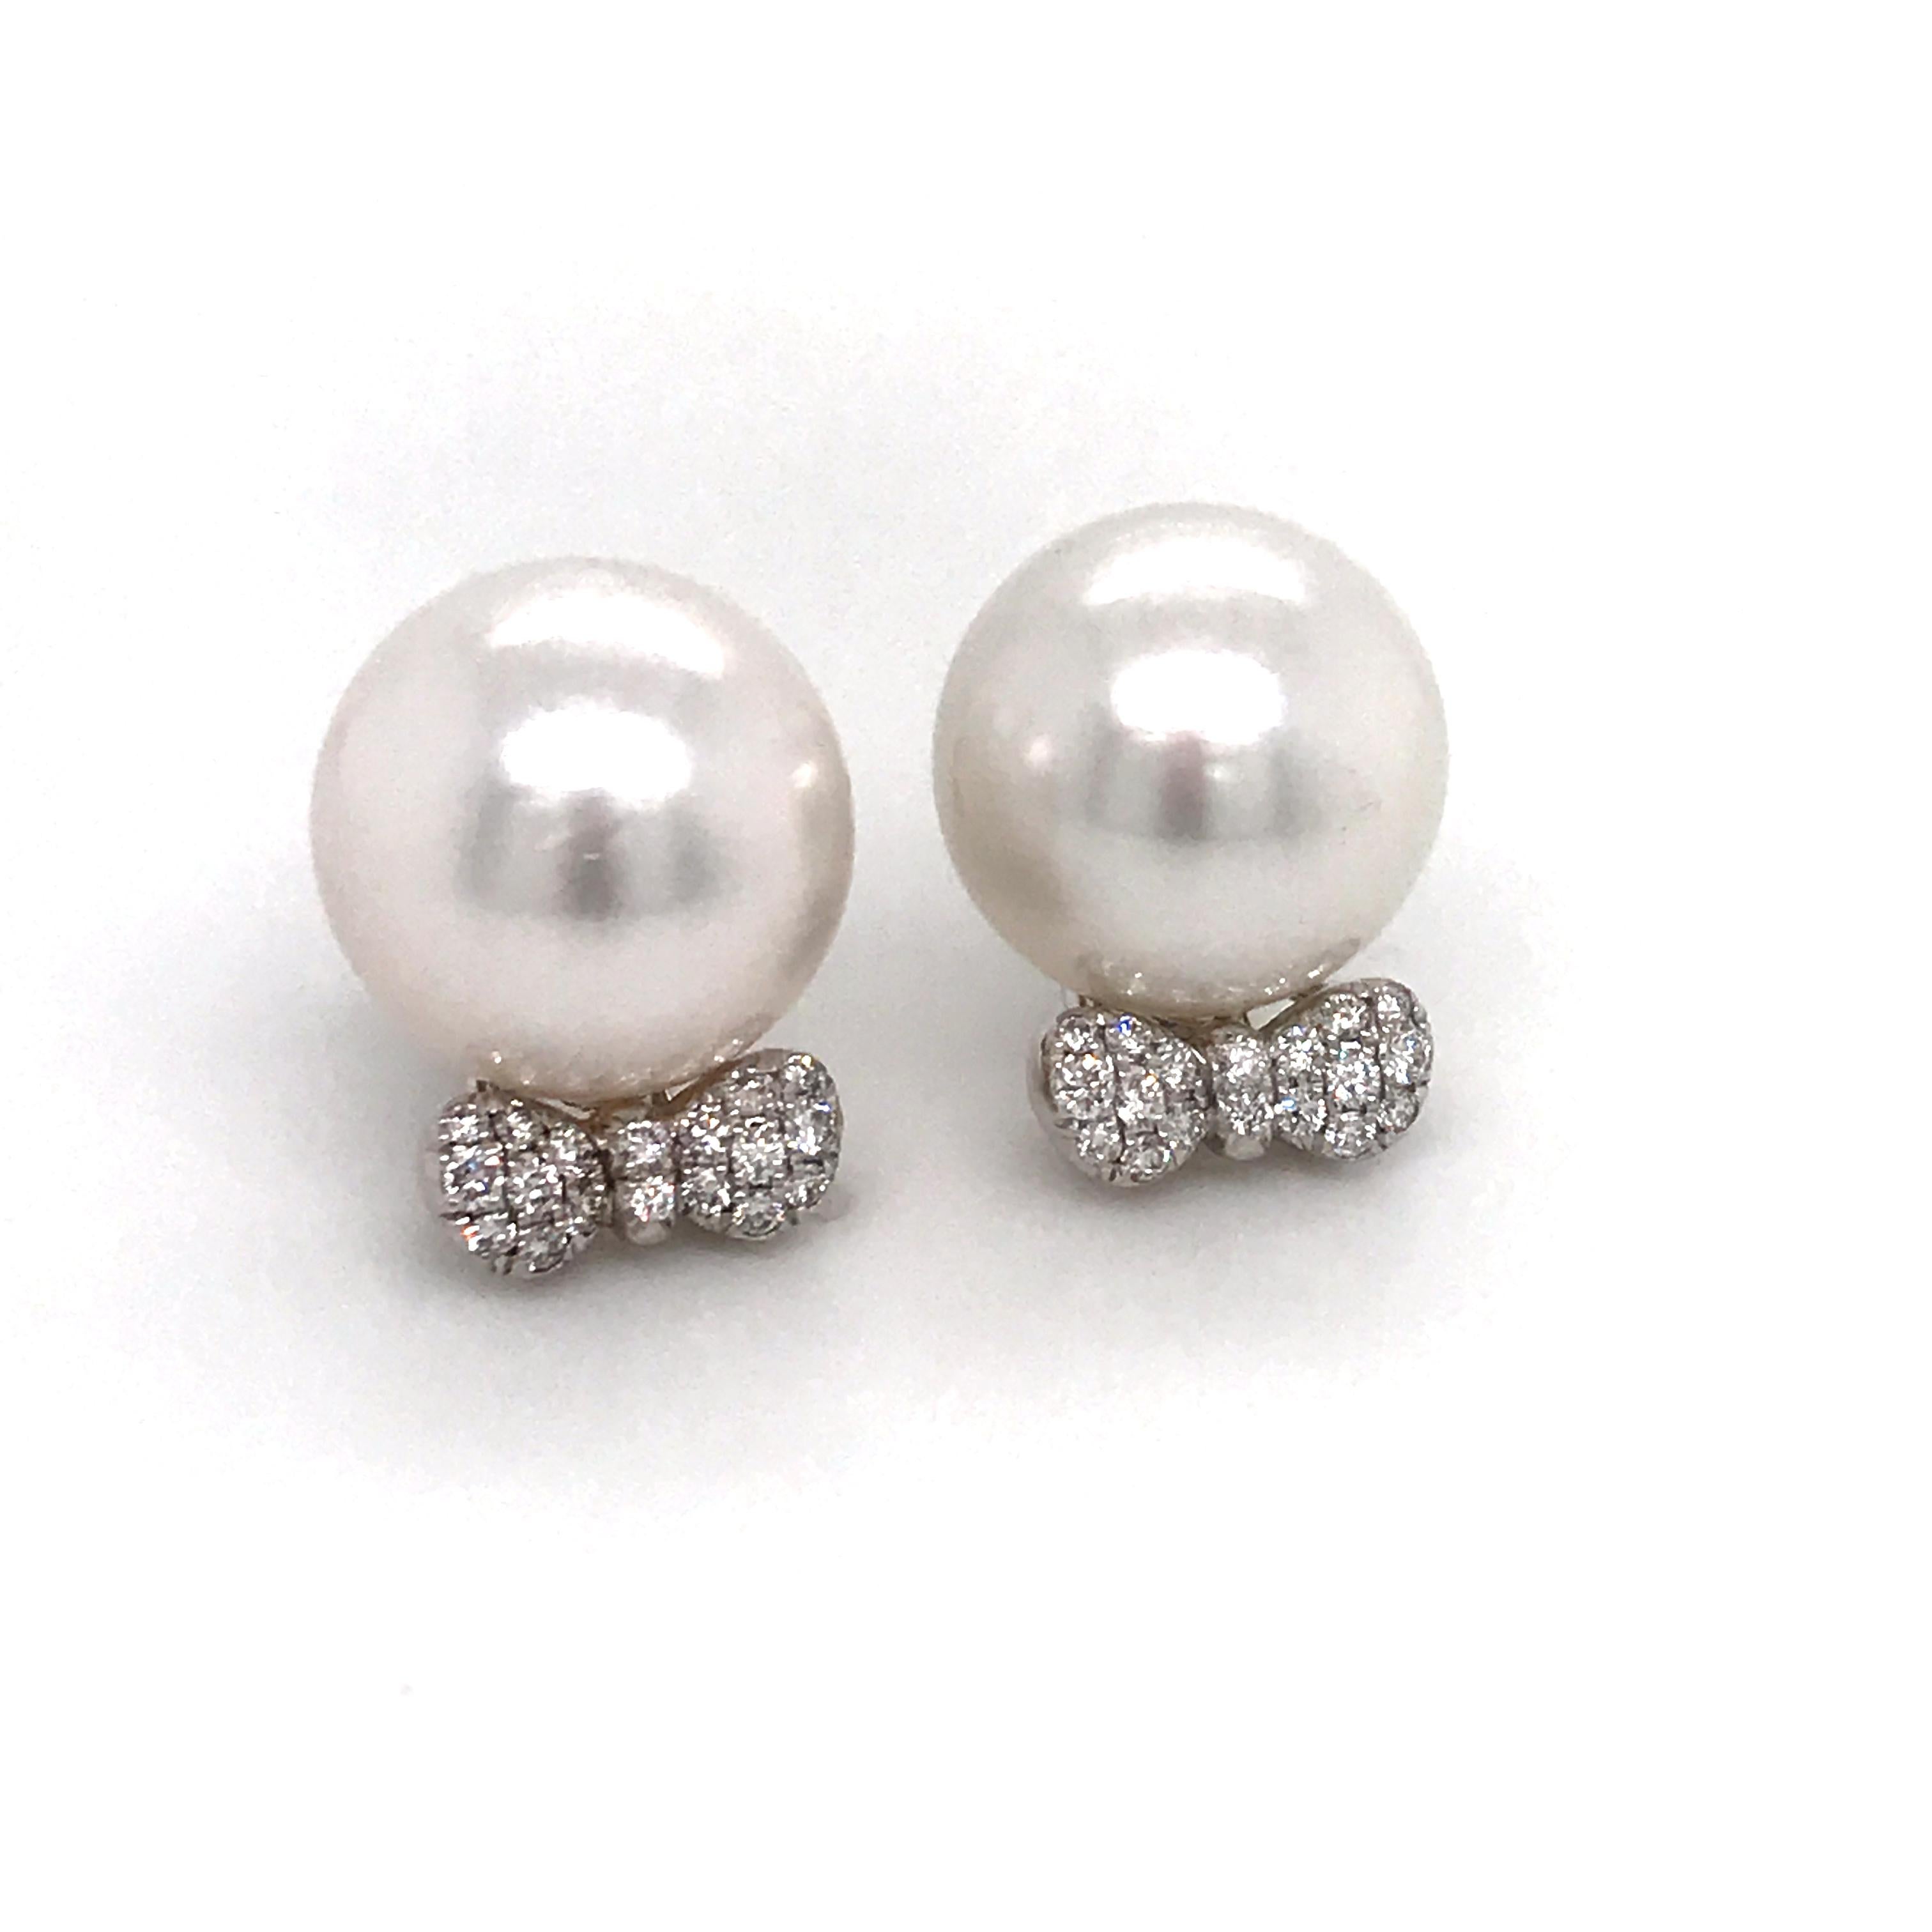 18K White gold earrings featuring two South Sea Pearls measuring 13-14 mm with a diamond motif bow with 36 diamonds weighing 0.36 carats. 
Color G-H
Clarity SI

Bow measures 7/16